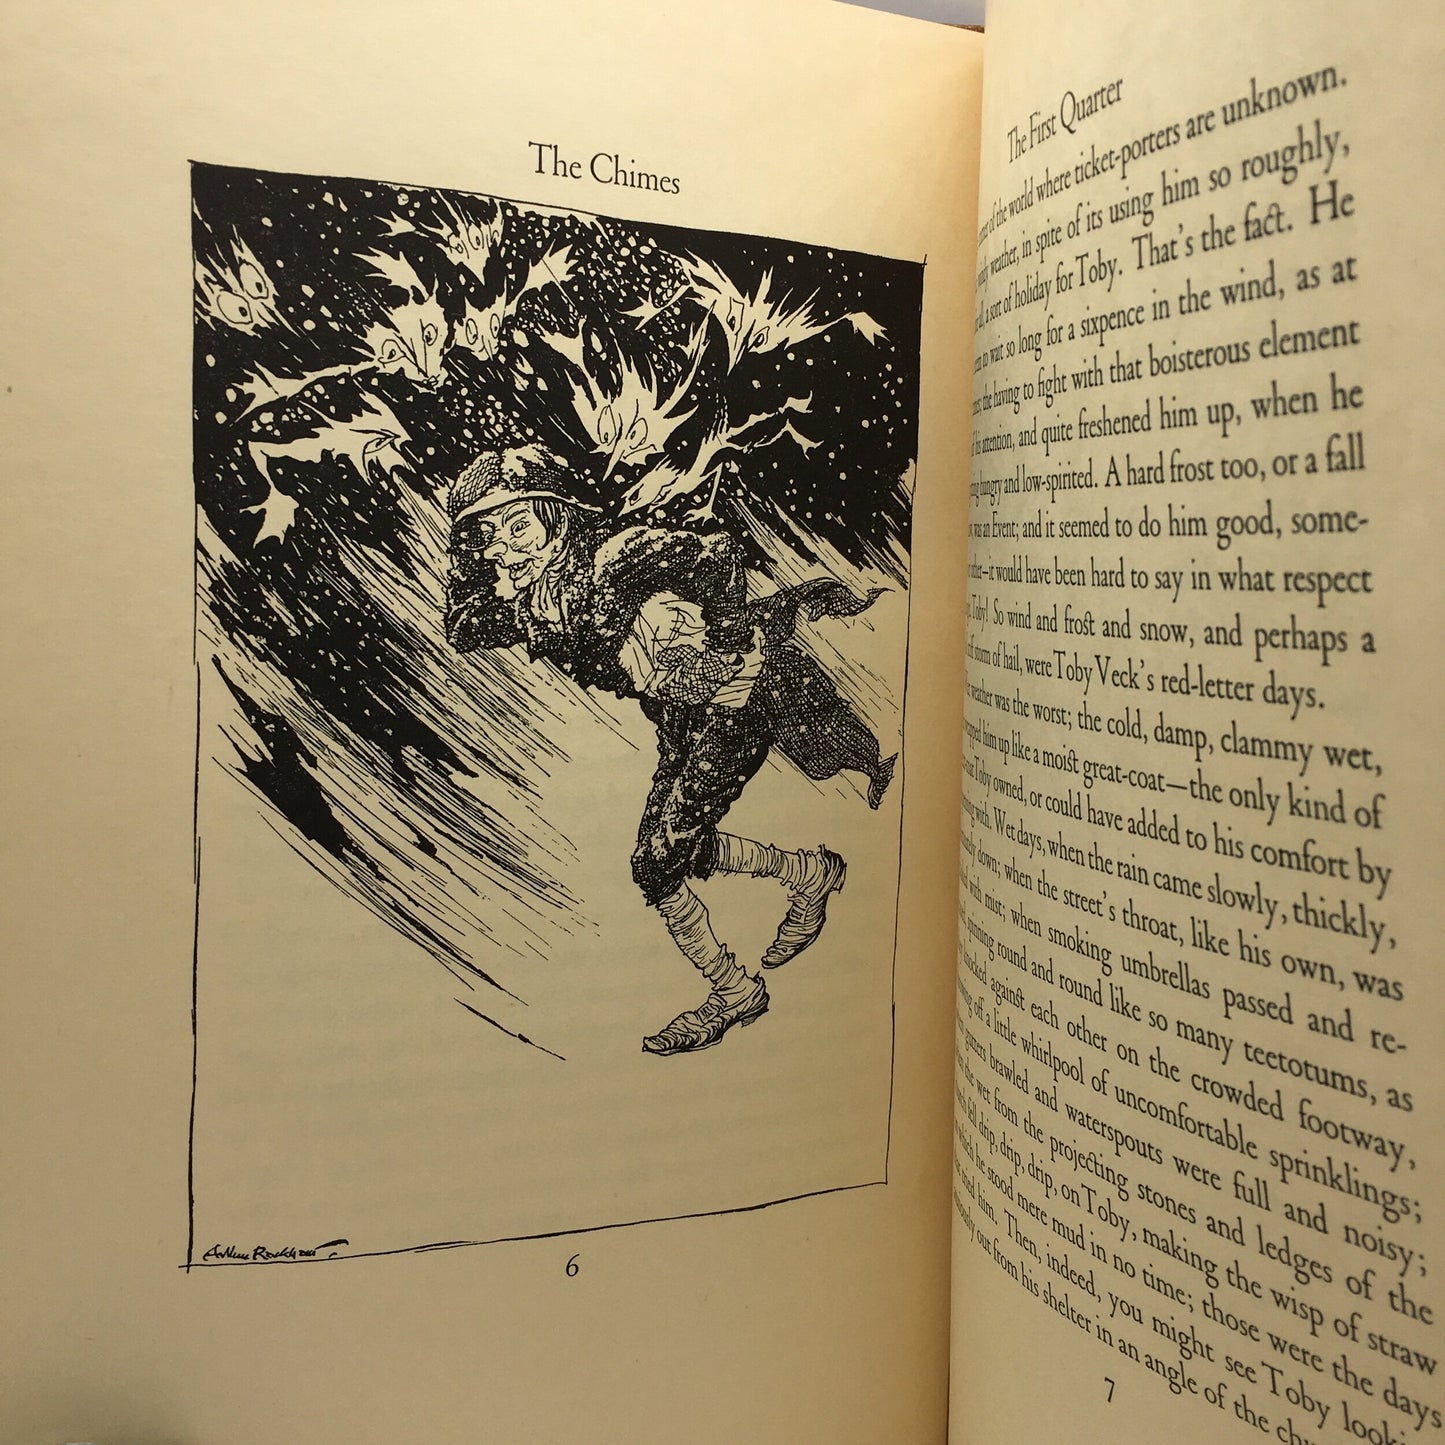 DICKENS, Charles "The Chimes" [Limited Editions Club, 1931] - Illustrated/Signed by Arthur Rackham - Buzz Bookstore